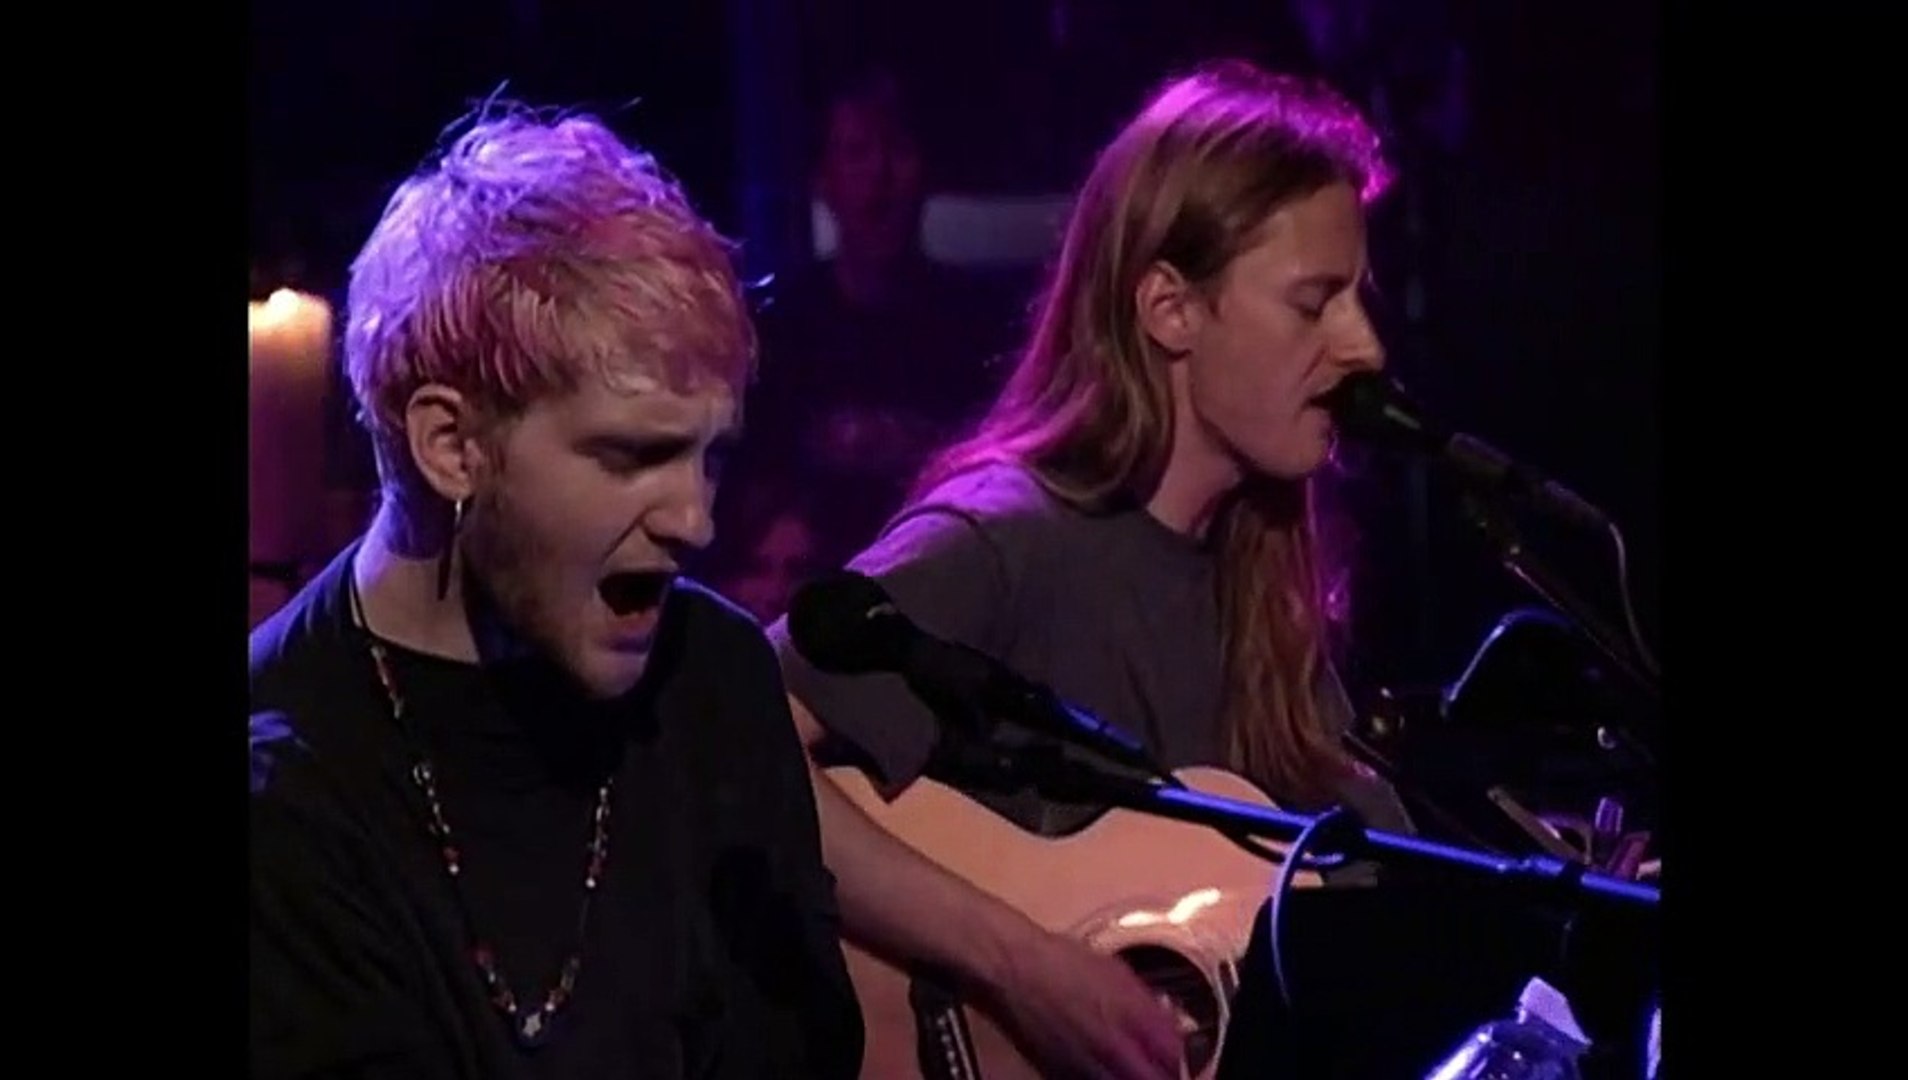 Alice In Chains - Down in a Hole (MTV Unplugged - HD Video) 